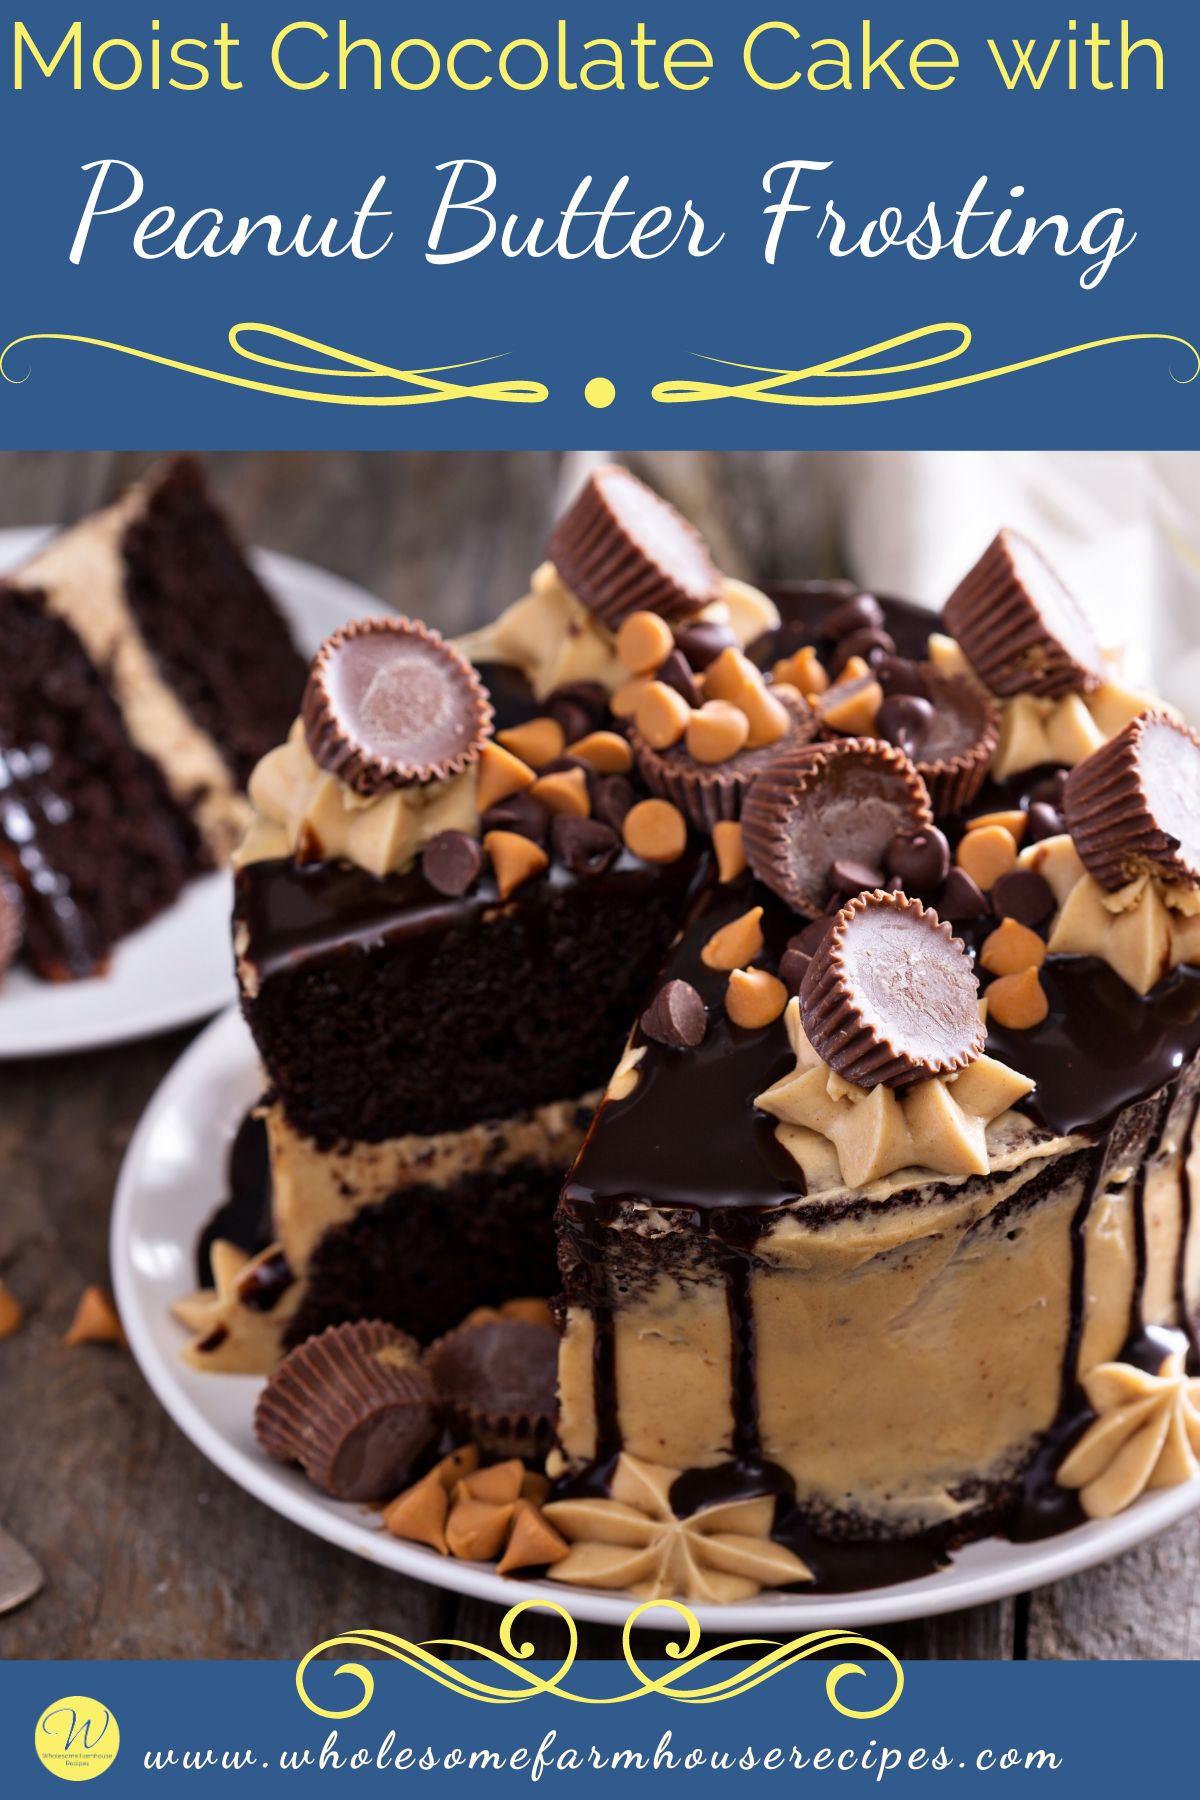 Moist Chocolate Cake with Peanut Butter Frosting